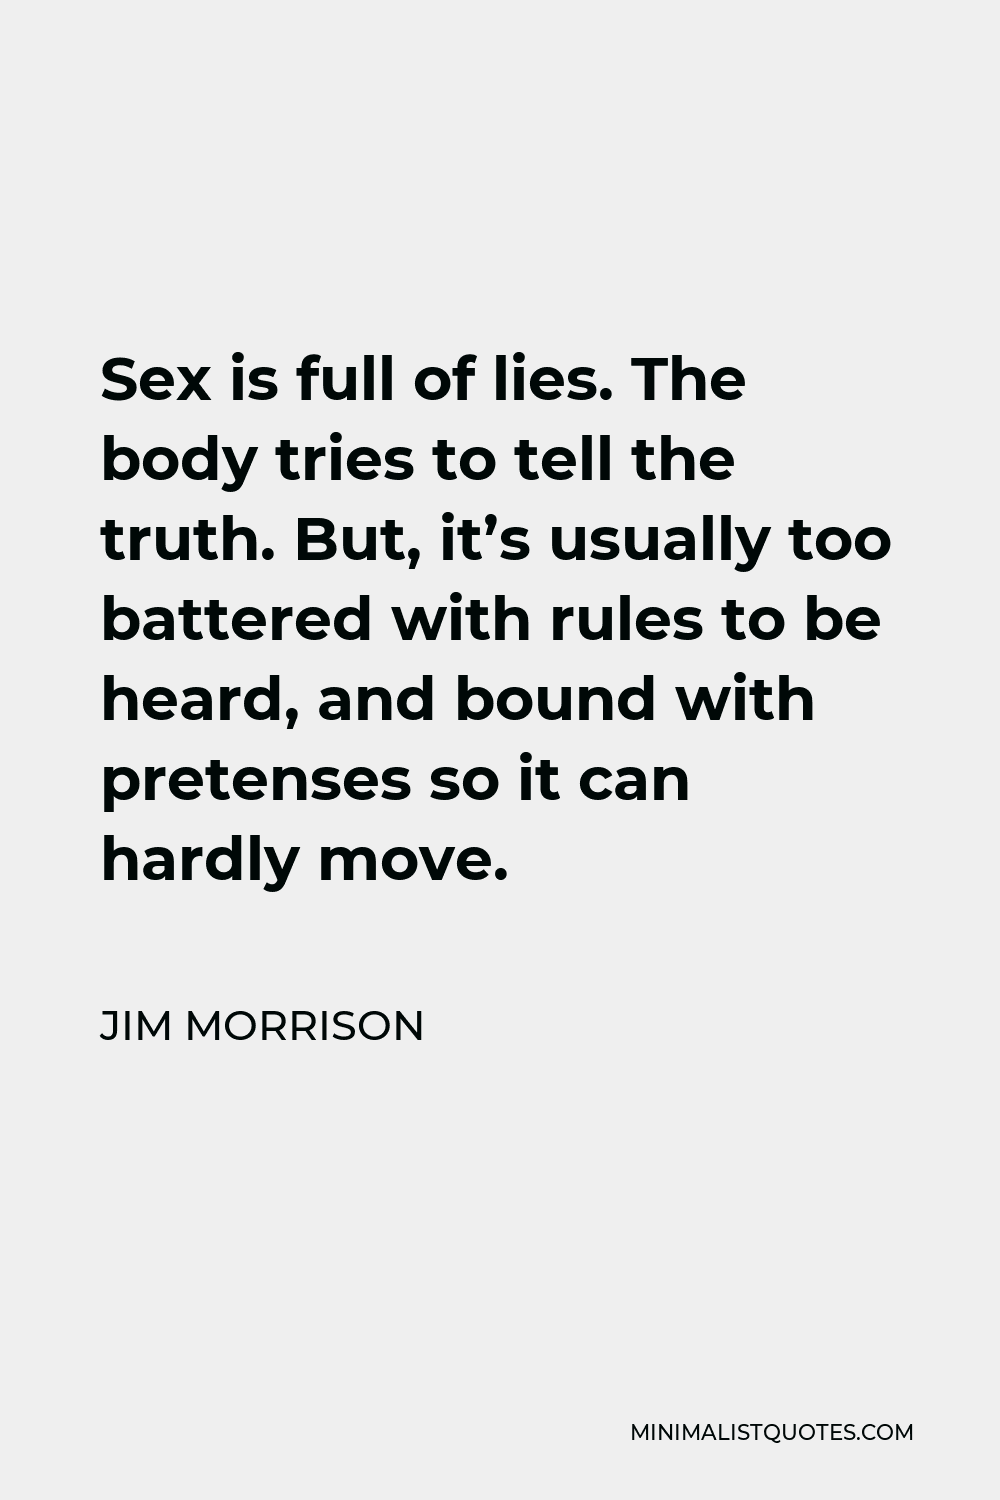 Jim Morrison Quote Sex Is Full Of Lies The Body Tries To Tell The Truth But Its Usually Too